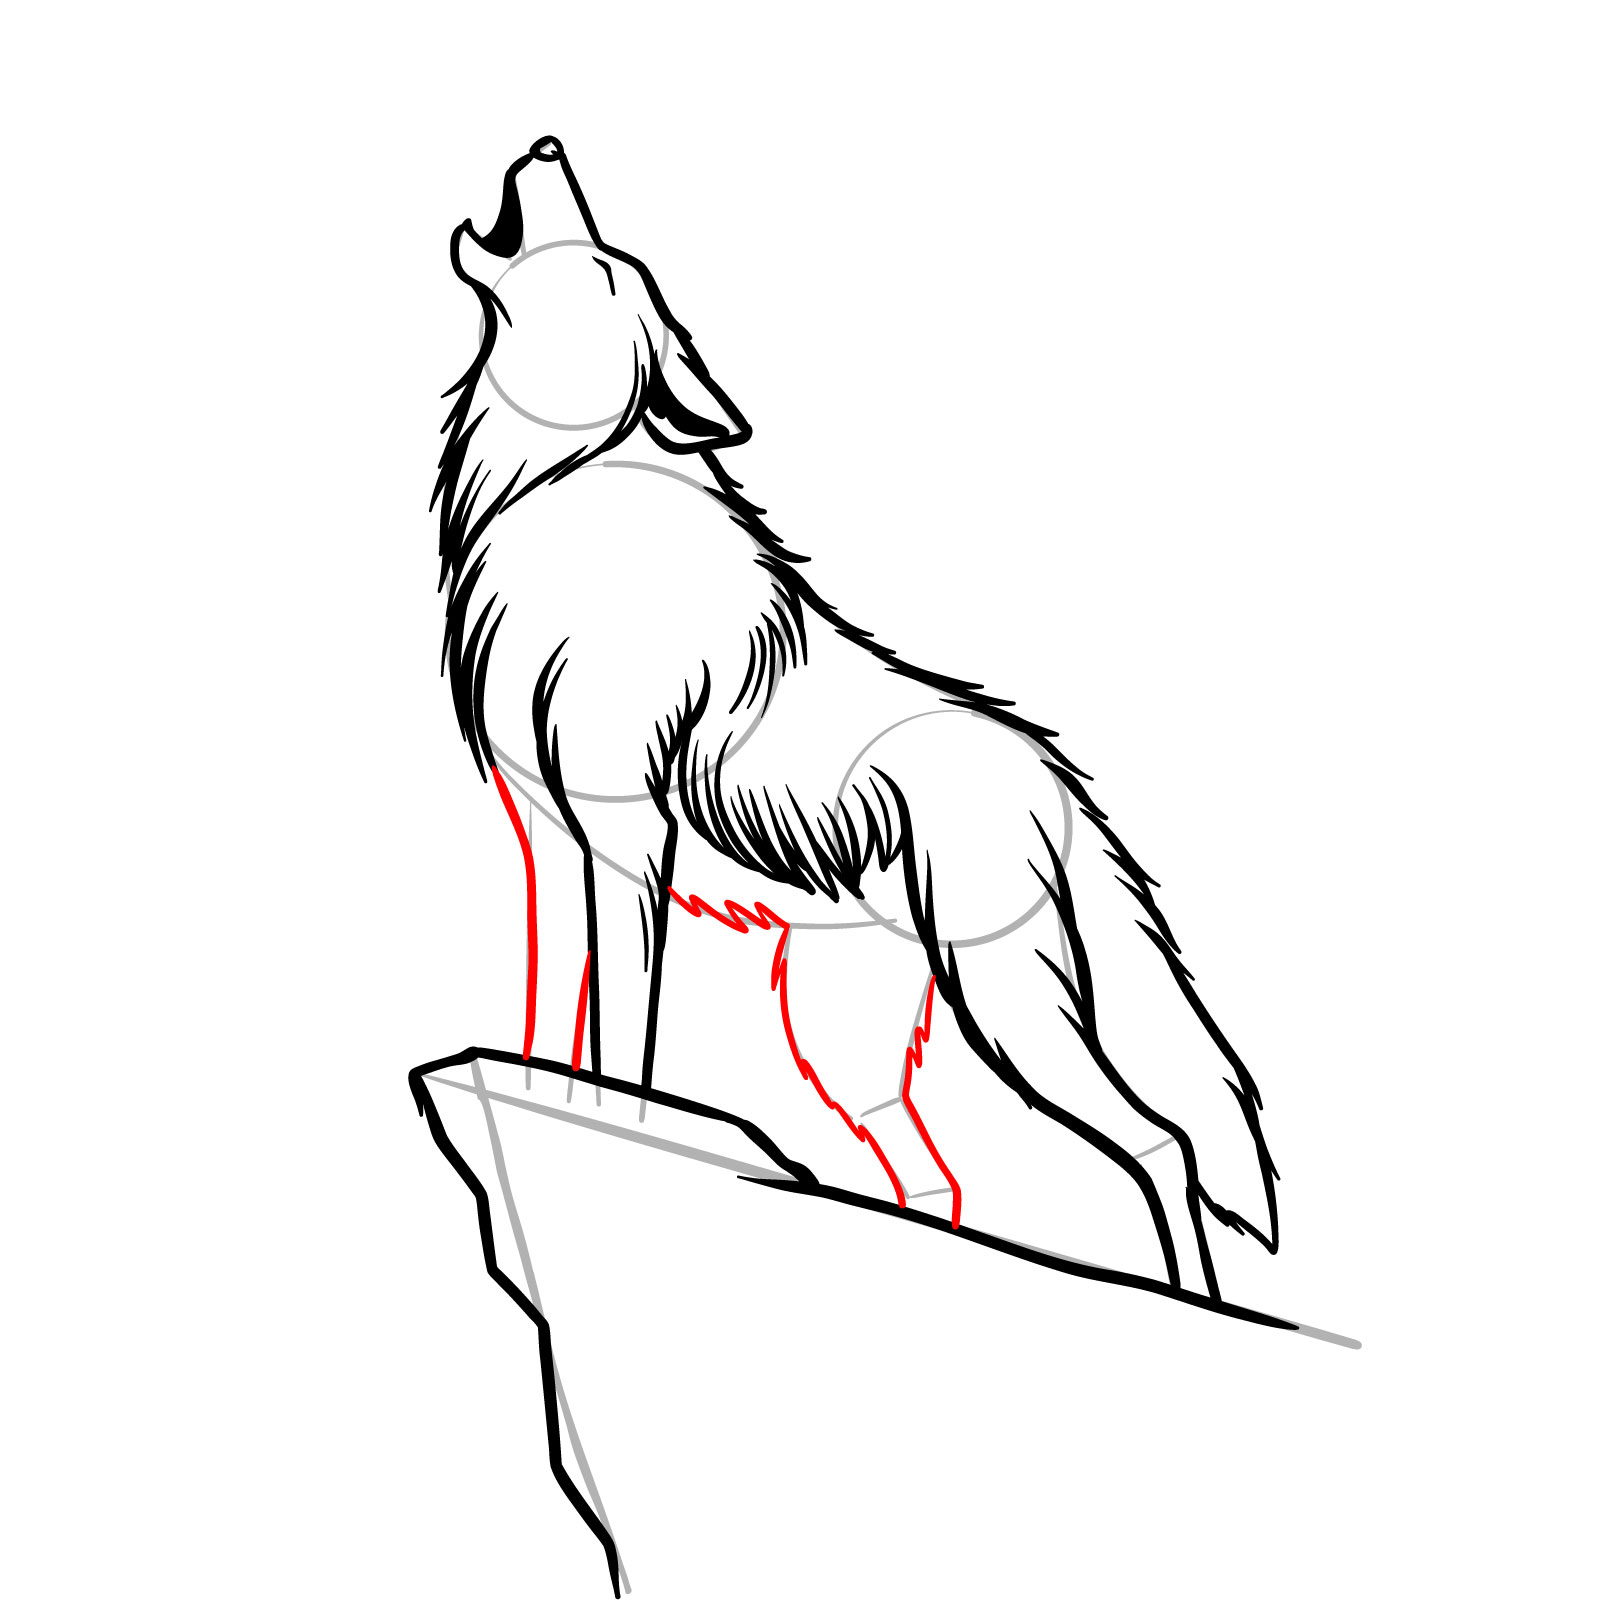 Refining the shape of the lower body and legs of a howling wolf - step 10